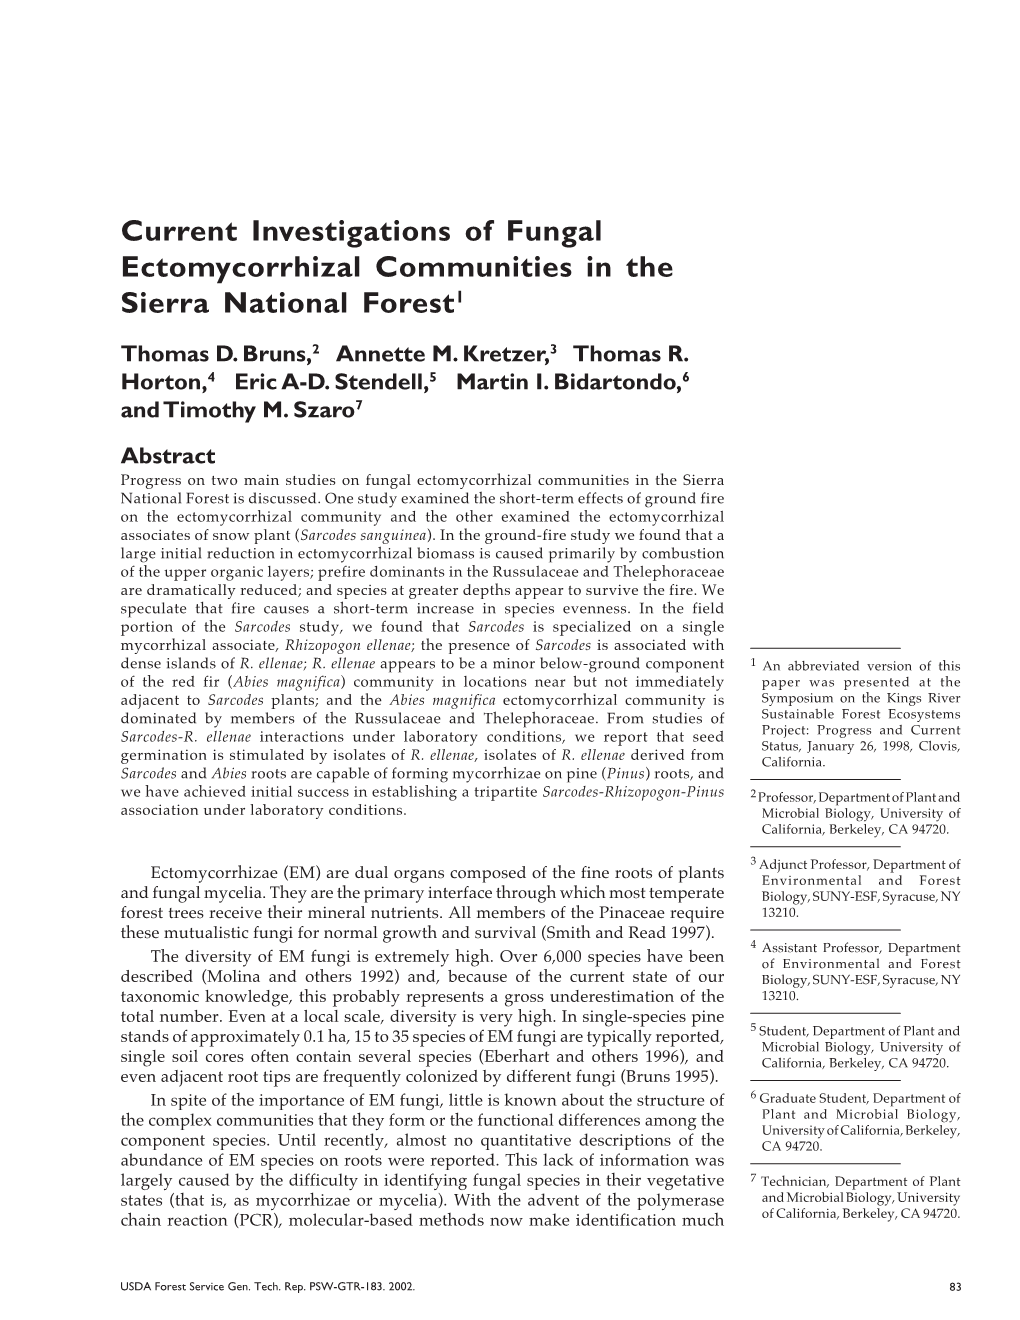 Current Investigations of Fungal Ectomycorrhizal Communities in the Sierra National Forest1